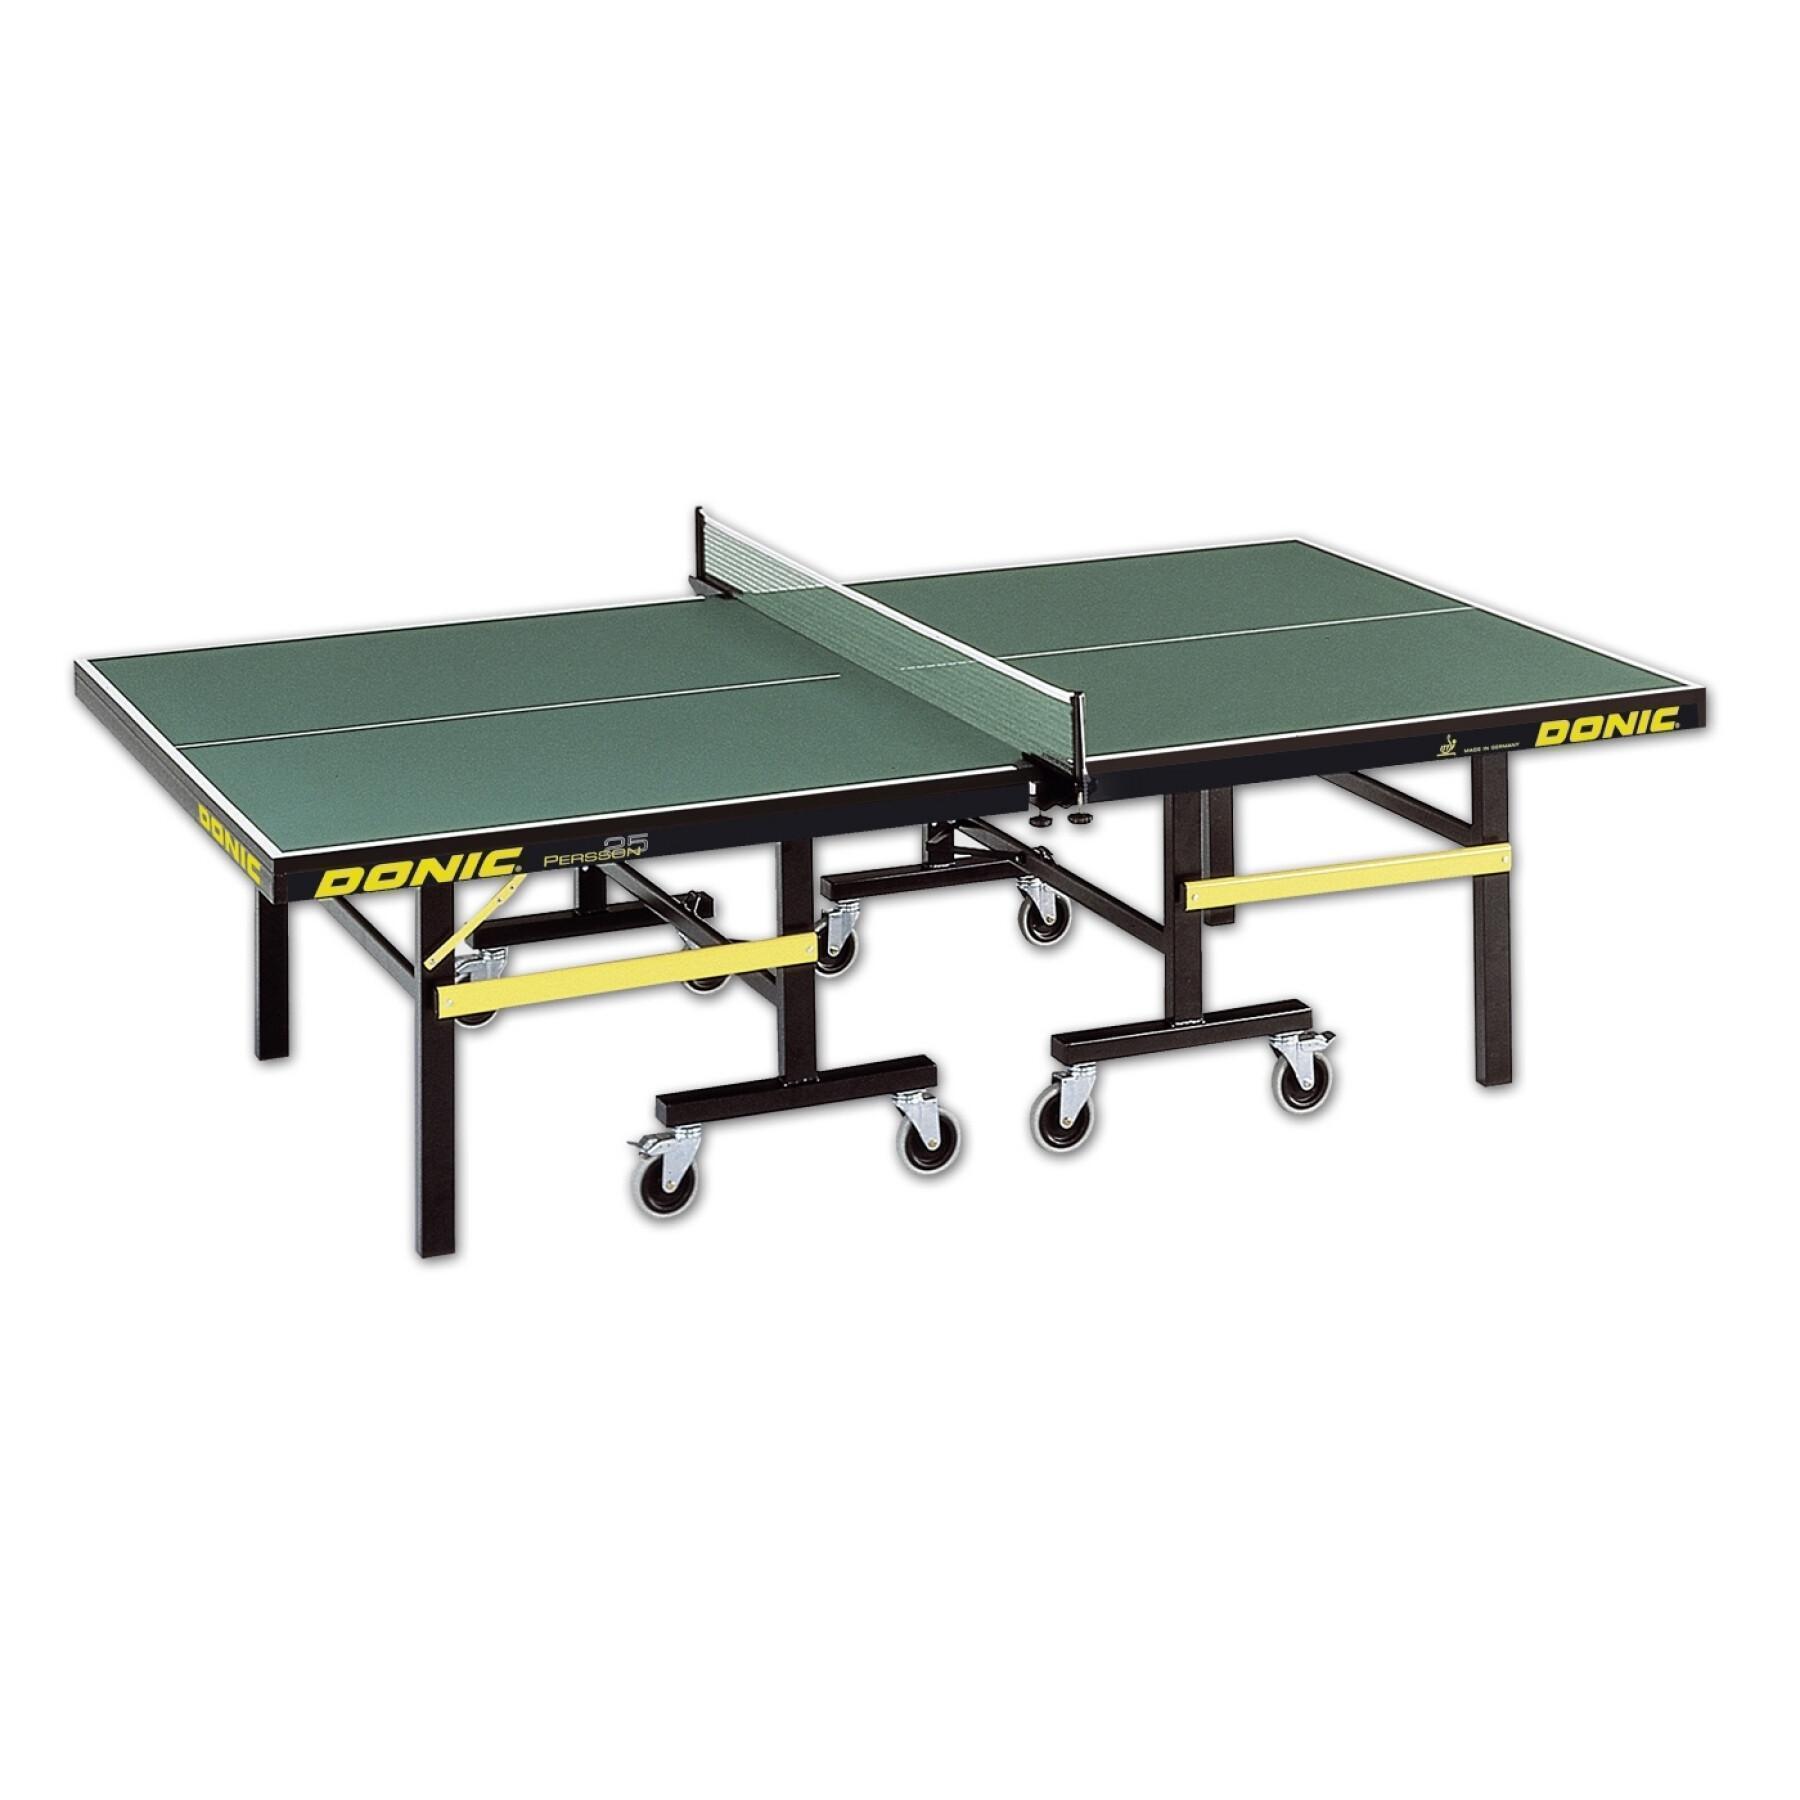 Mesa de ping-pong Donic Persson 25